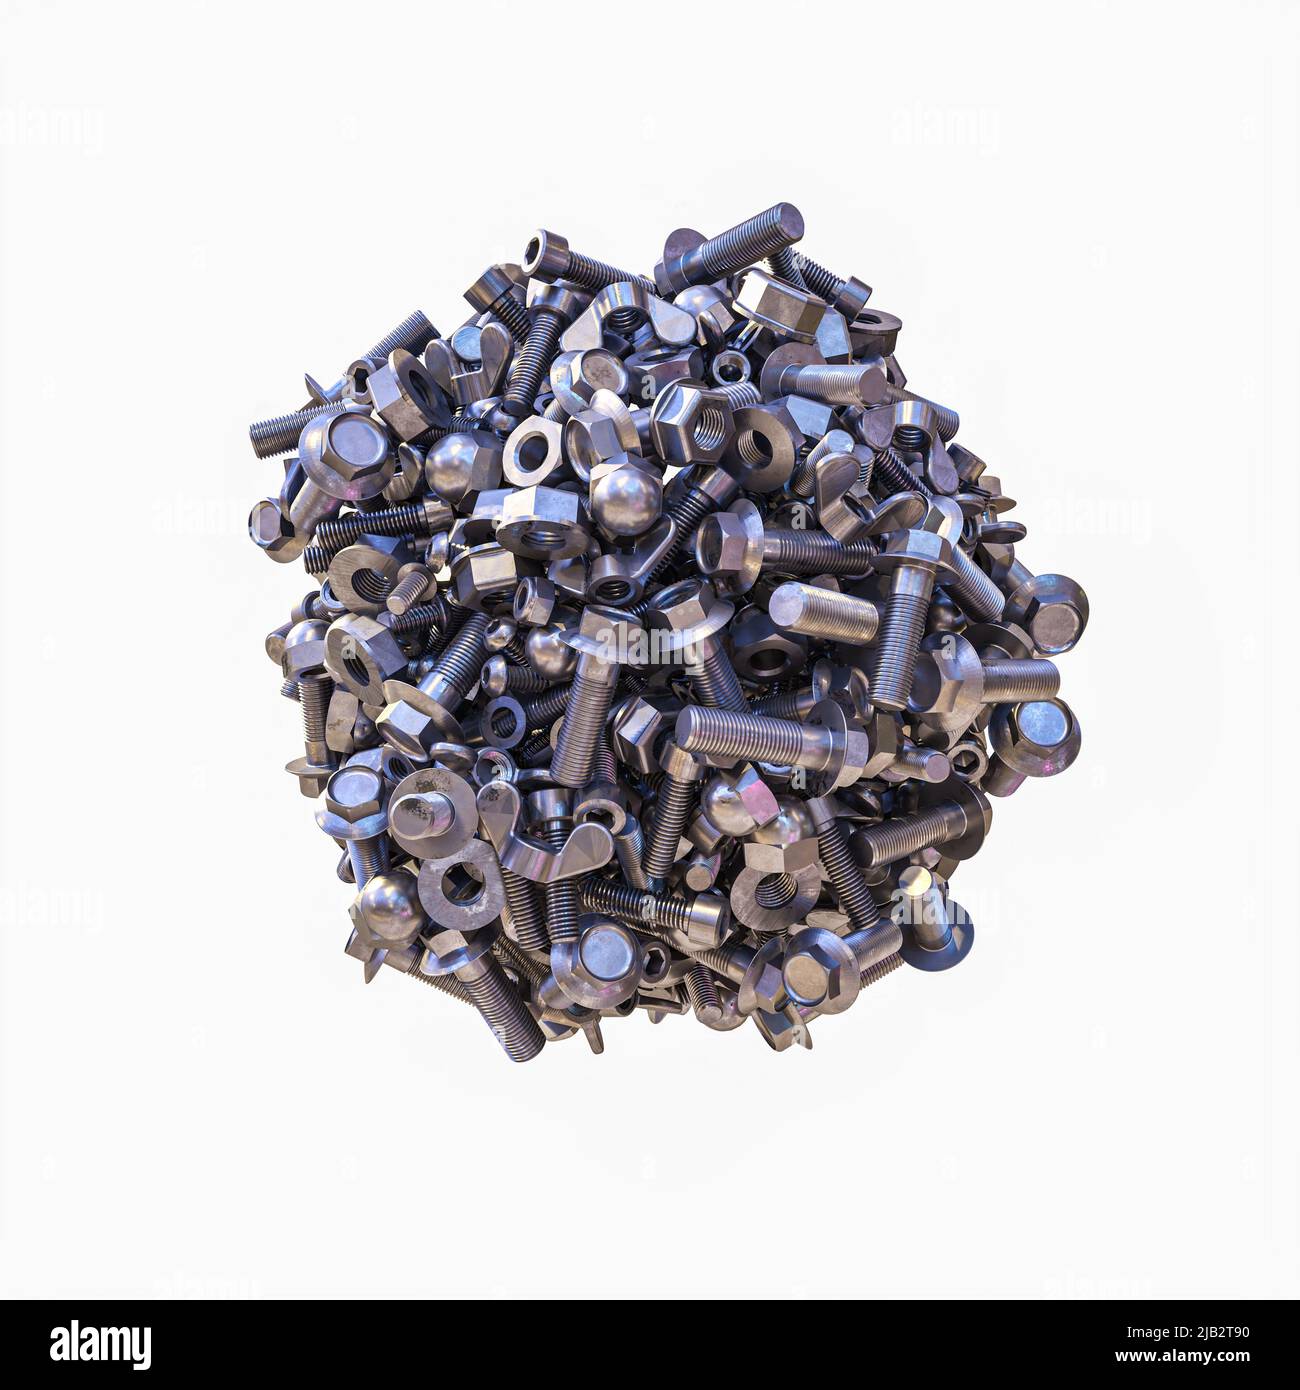 agglomeration of bolts, nuts and small mechanical parts on a white background. 3d render Stock Photo